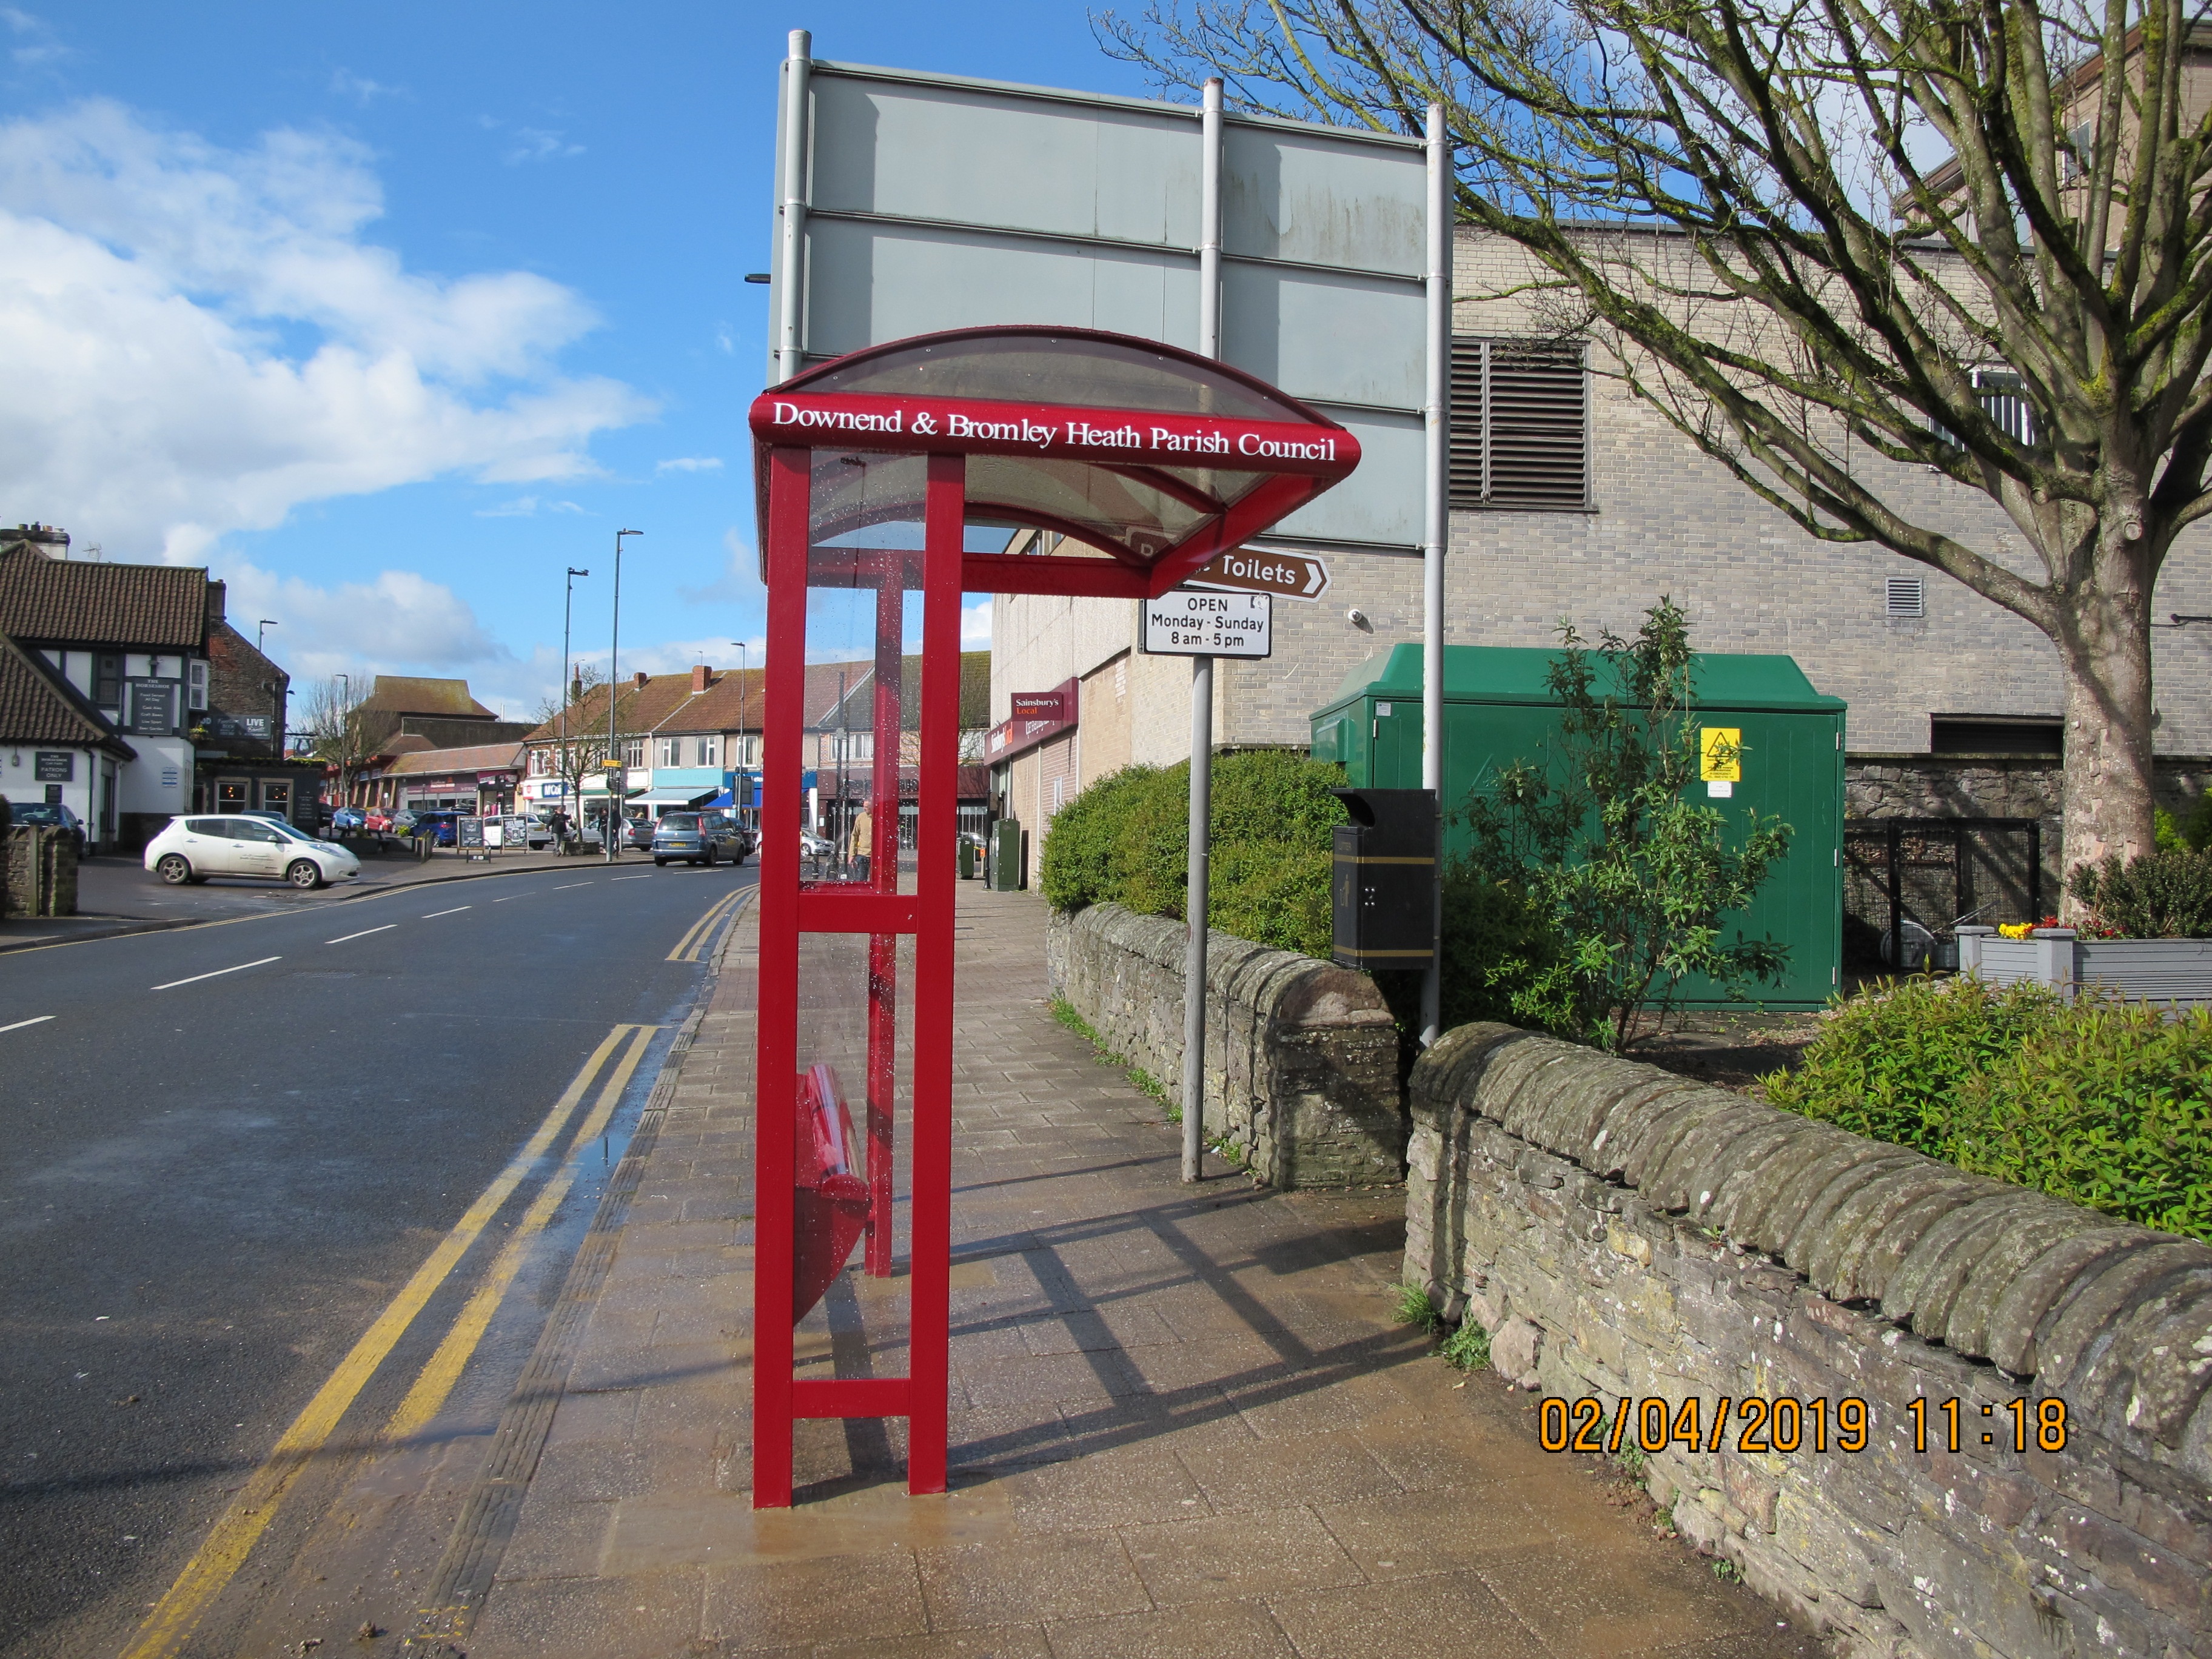 Picture of one of the Parish bus stop shelters